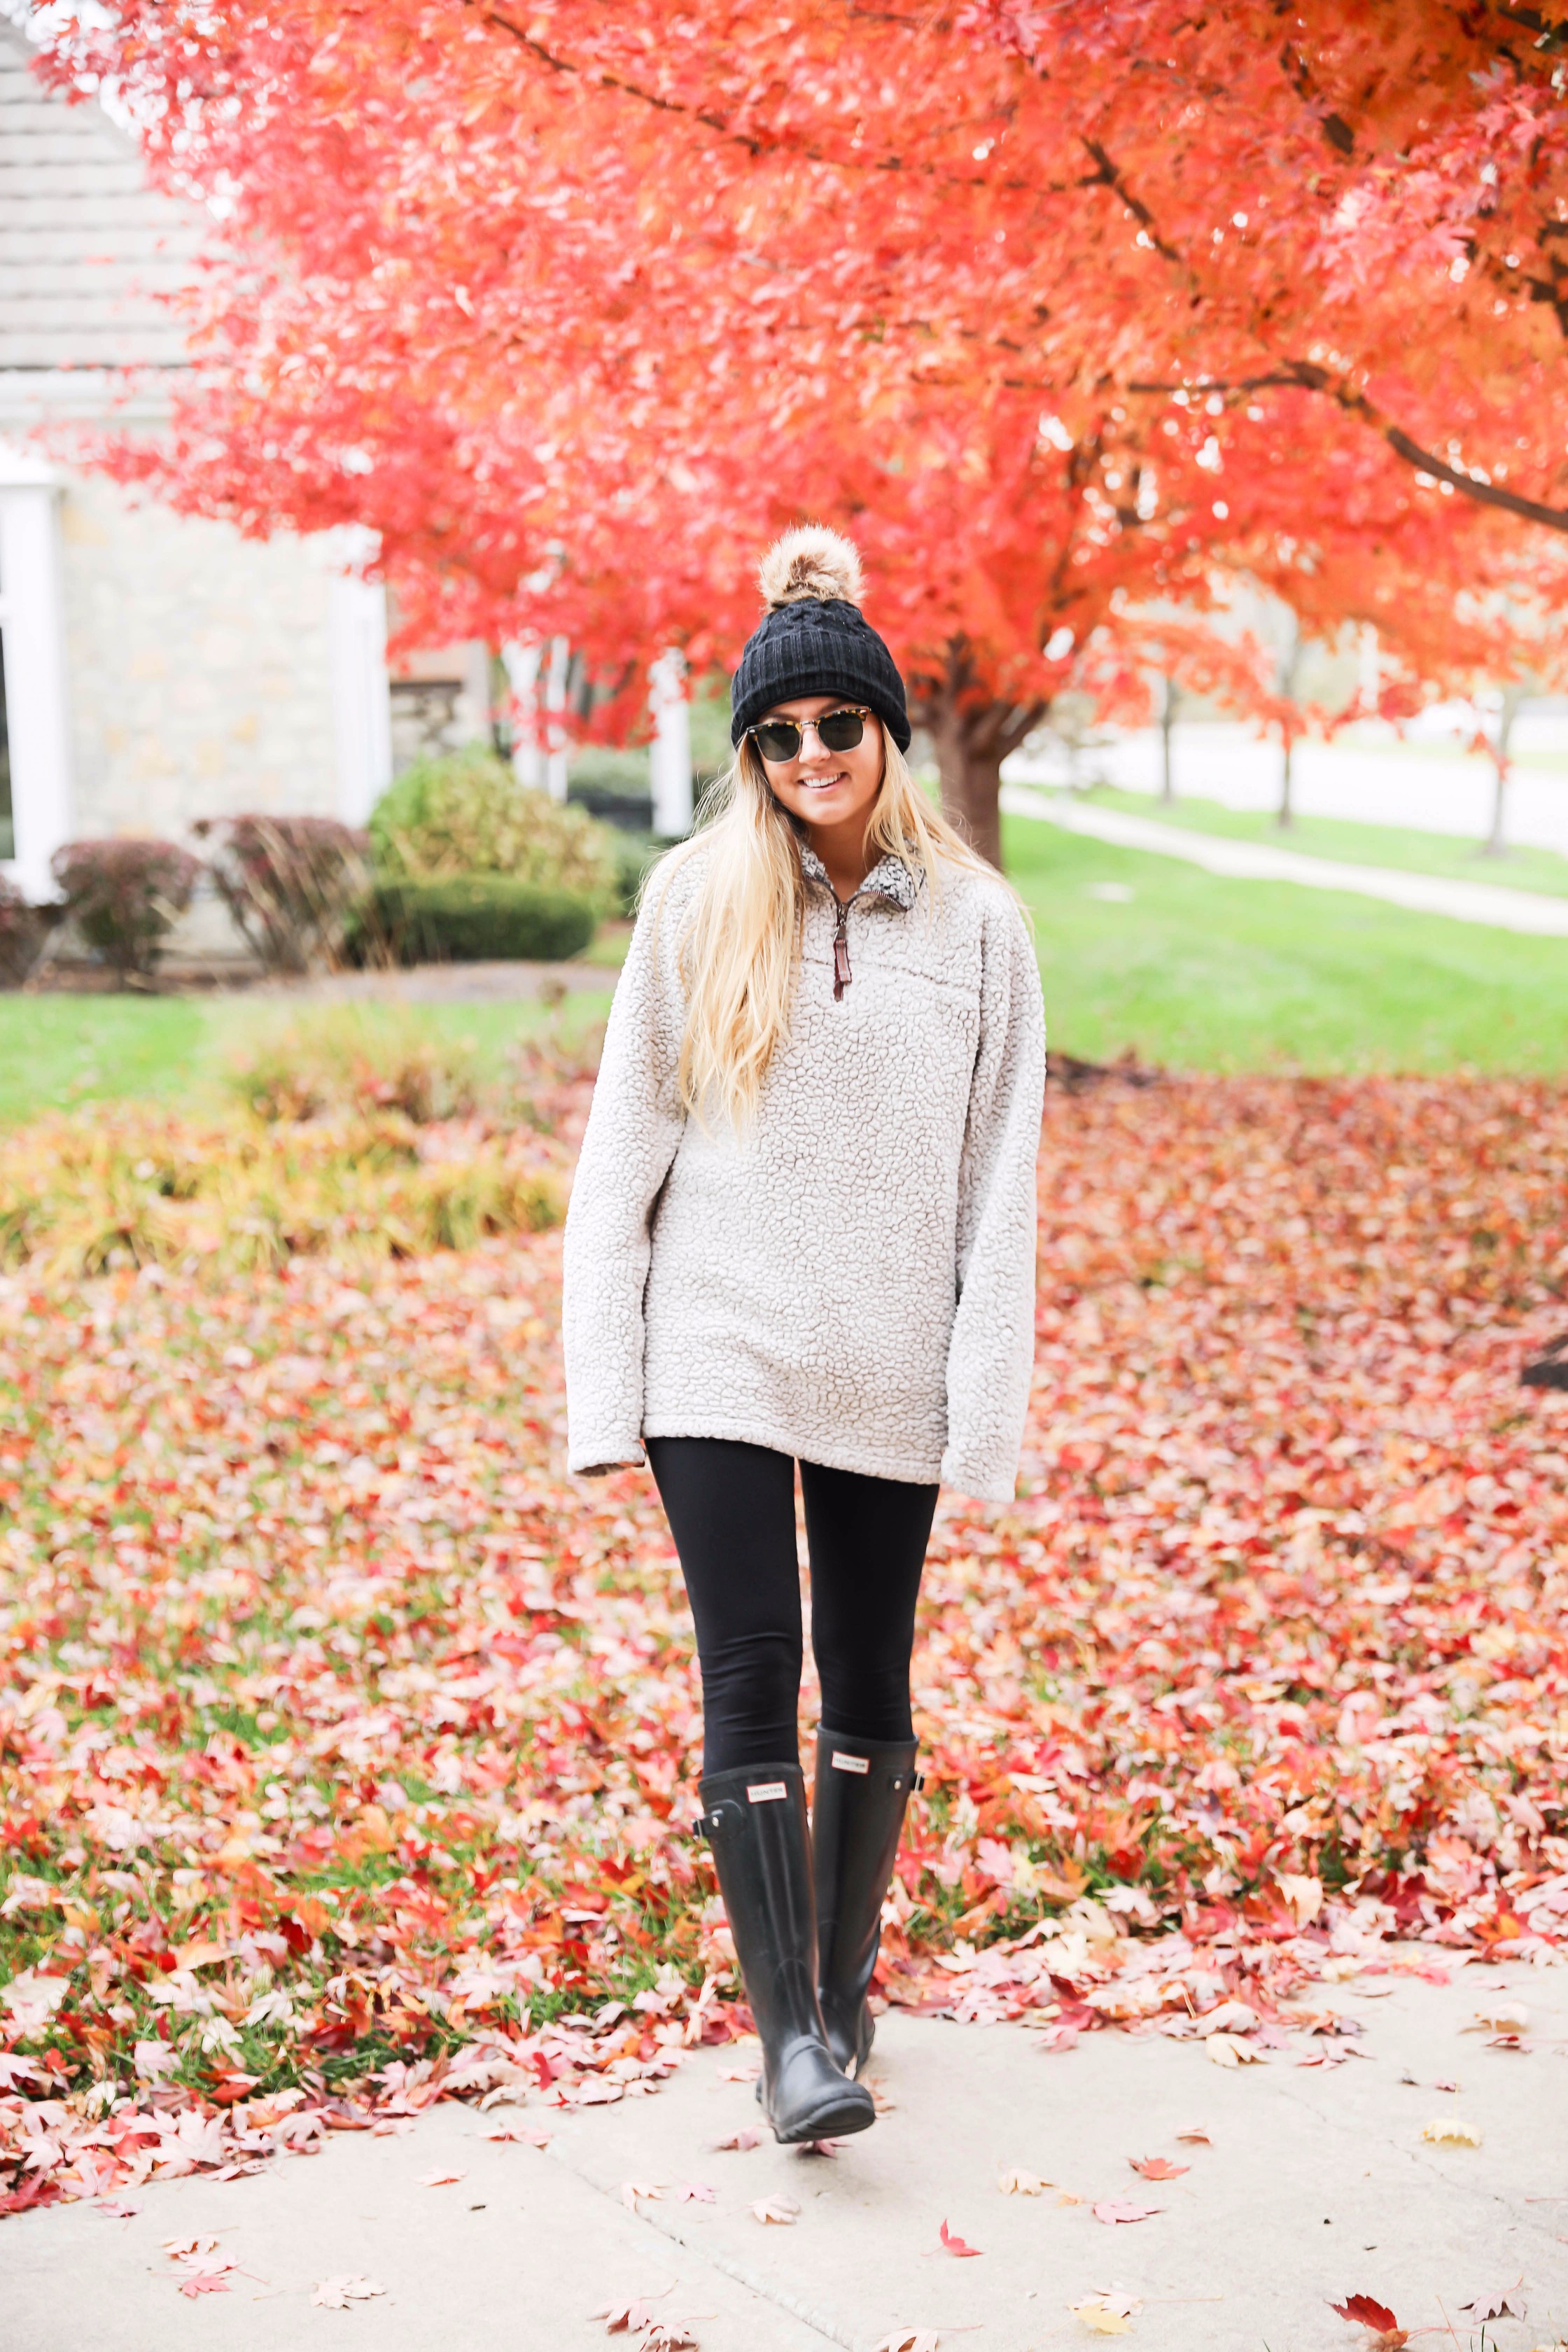 True grit sweatshirt with faux fur black beanie! Cute and comfy fall fashion! Find the details on daily dose of charm lauren lindmark